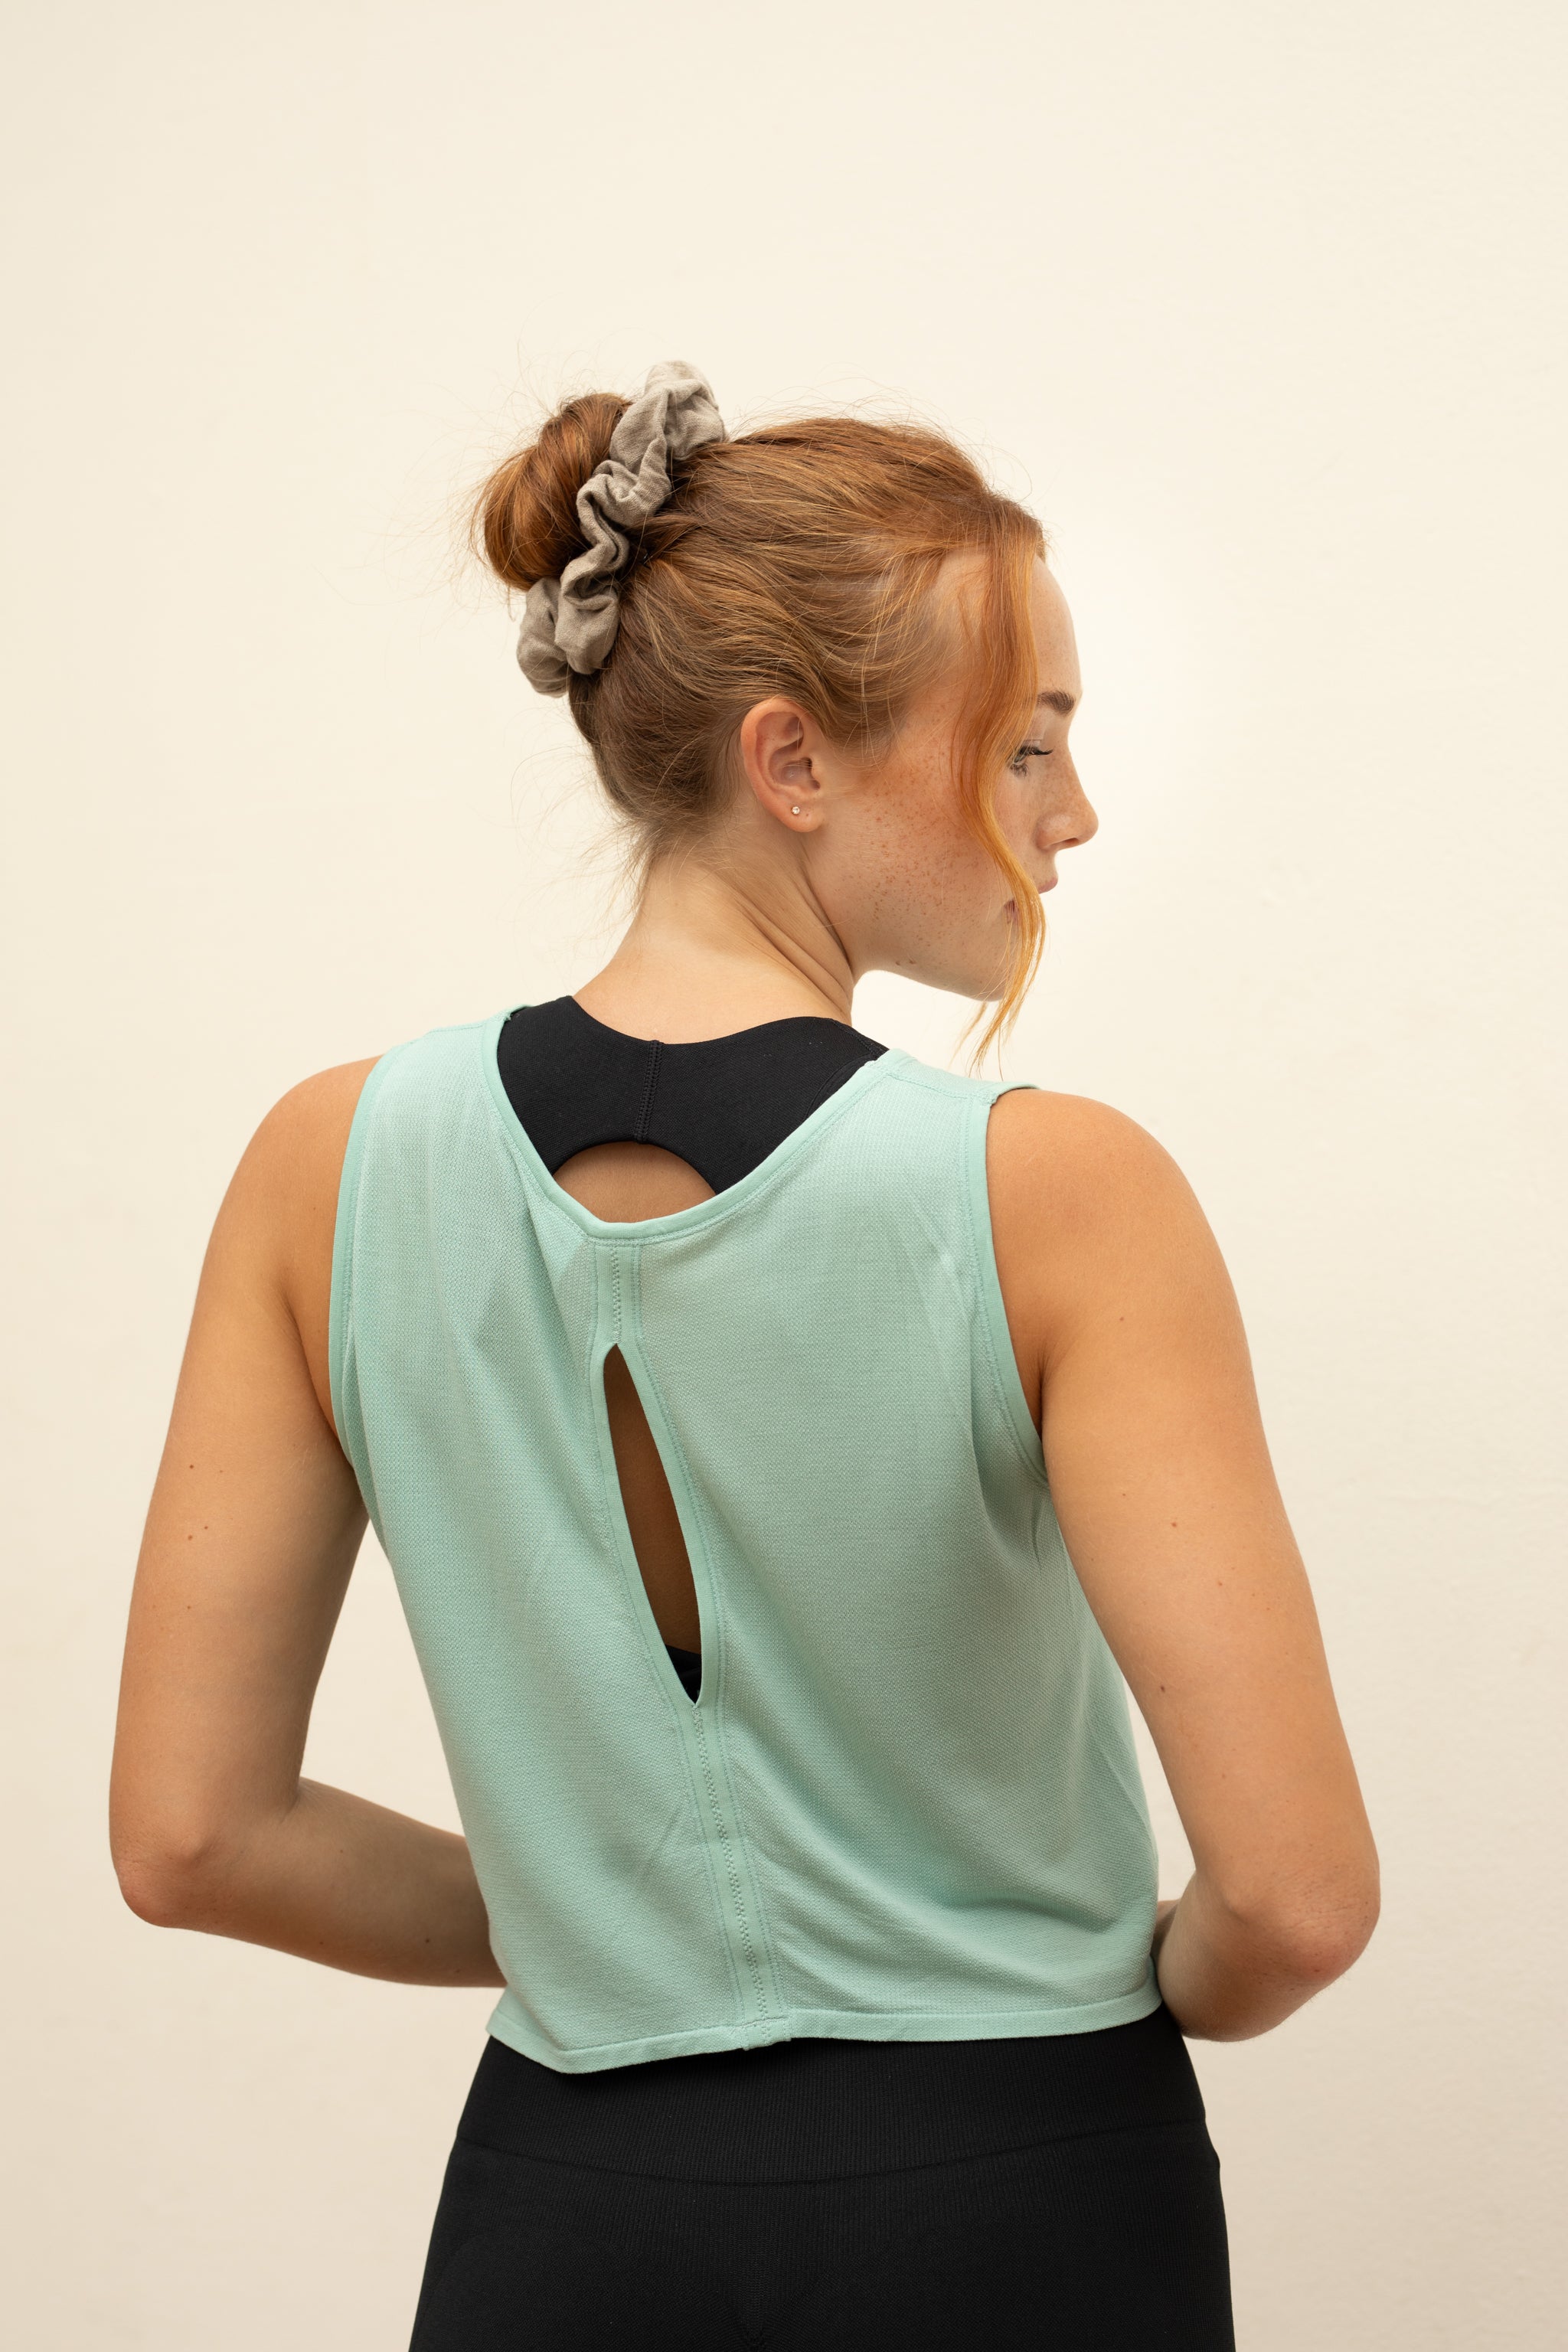 Model wearing mint green leggings and blue sports yoga tank top for sustainable activewear brand, Jilla.  